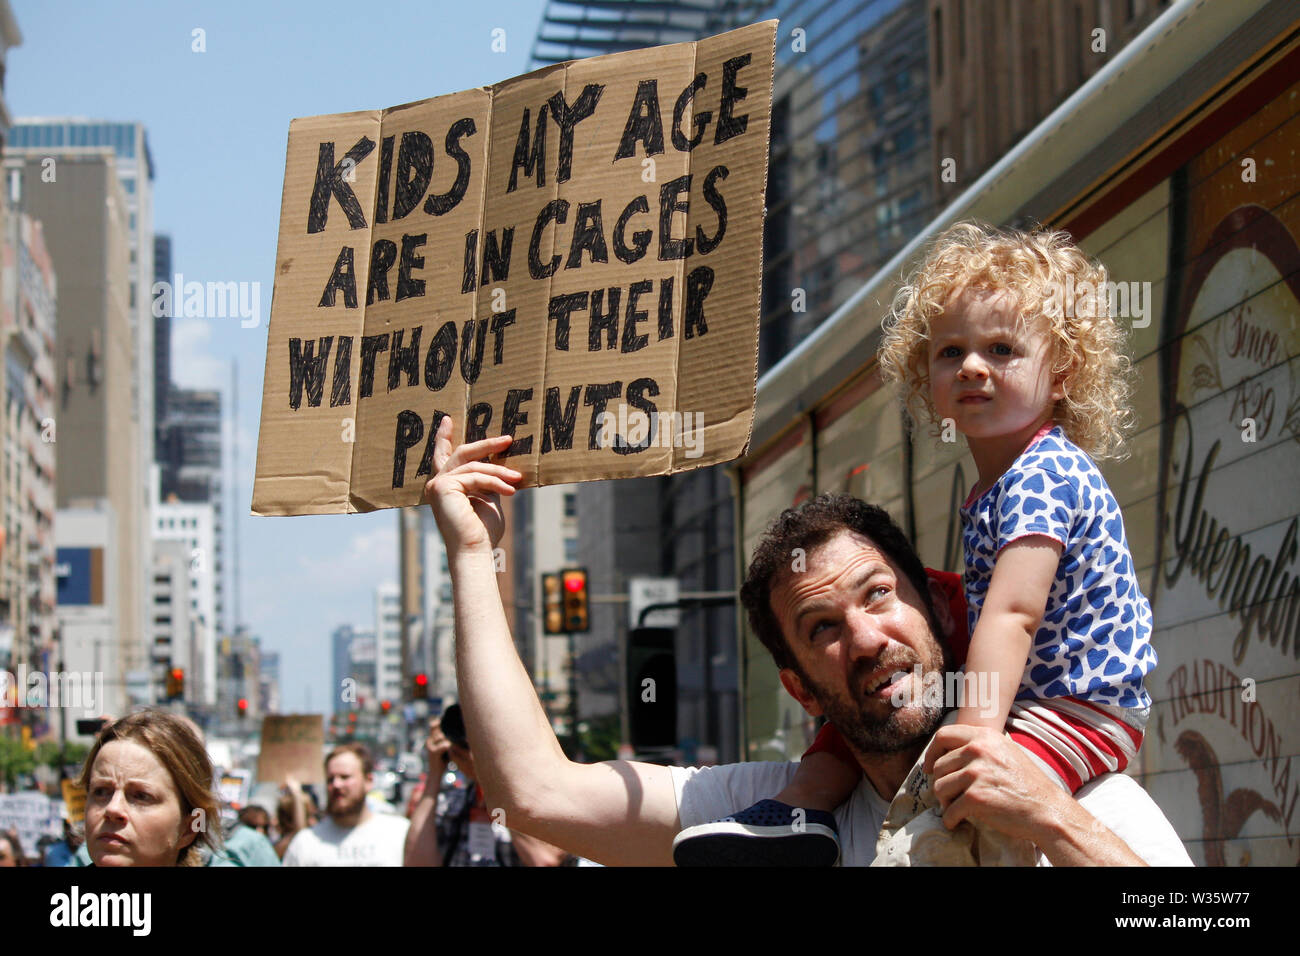 Philadelphia, PA, USA - July 12, 2019: A father and child hold a sign  to protest inhumane conditions for children in immigration detention camps. Stock Photo